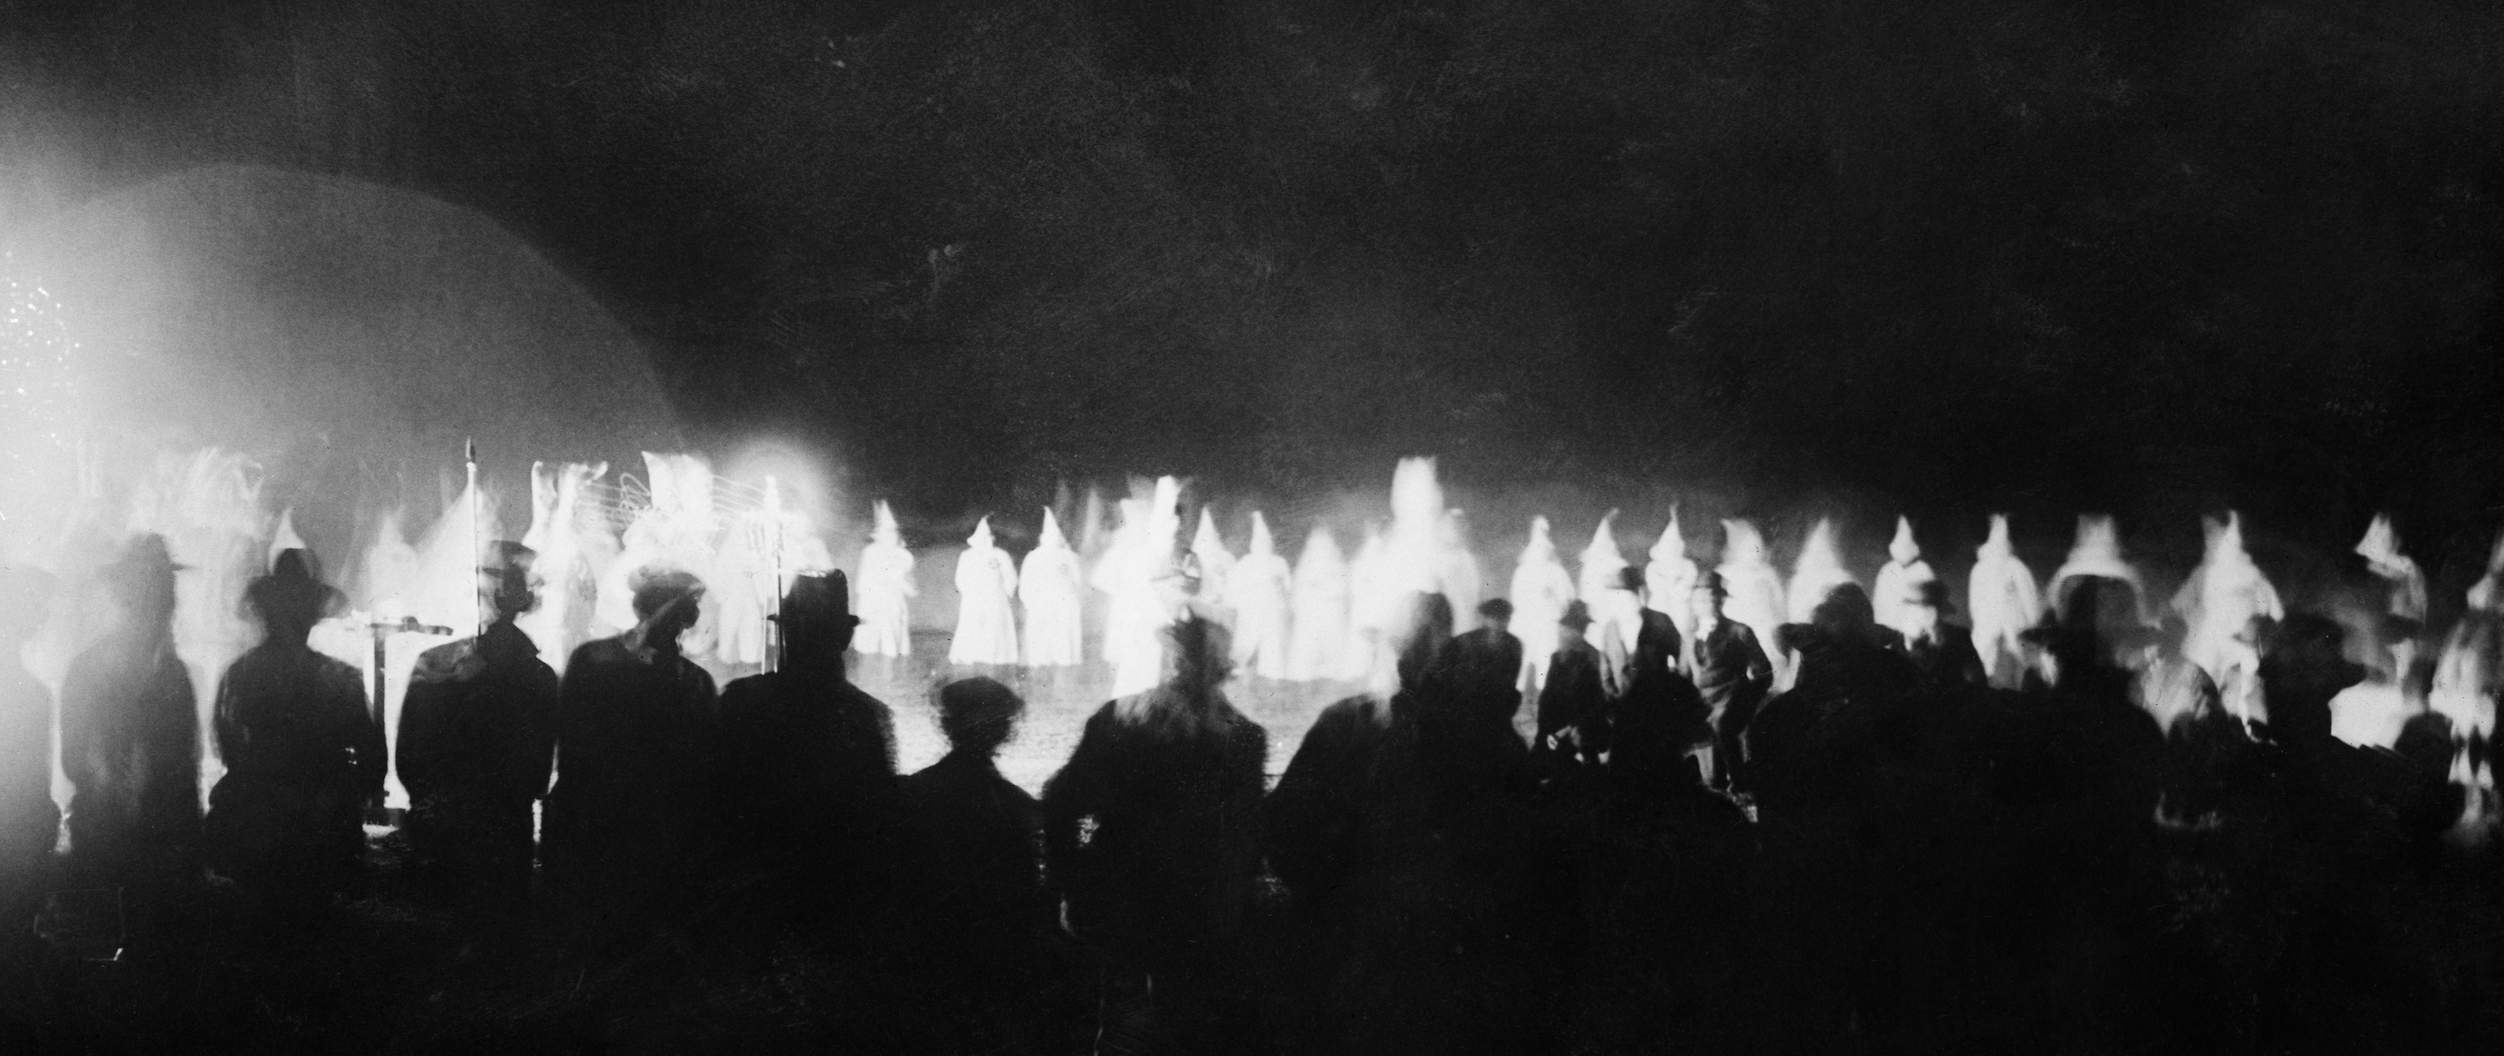 Onlookers watch as the Ku Klux Klan initiates new members at a Miami golf course in the 1920s. (Bettmann / Getty Images)